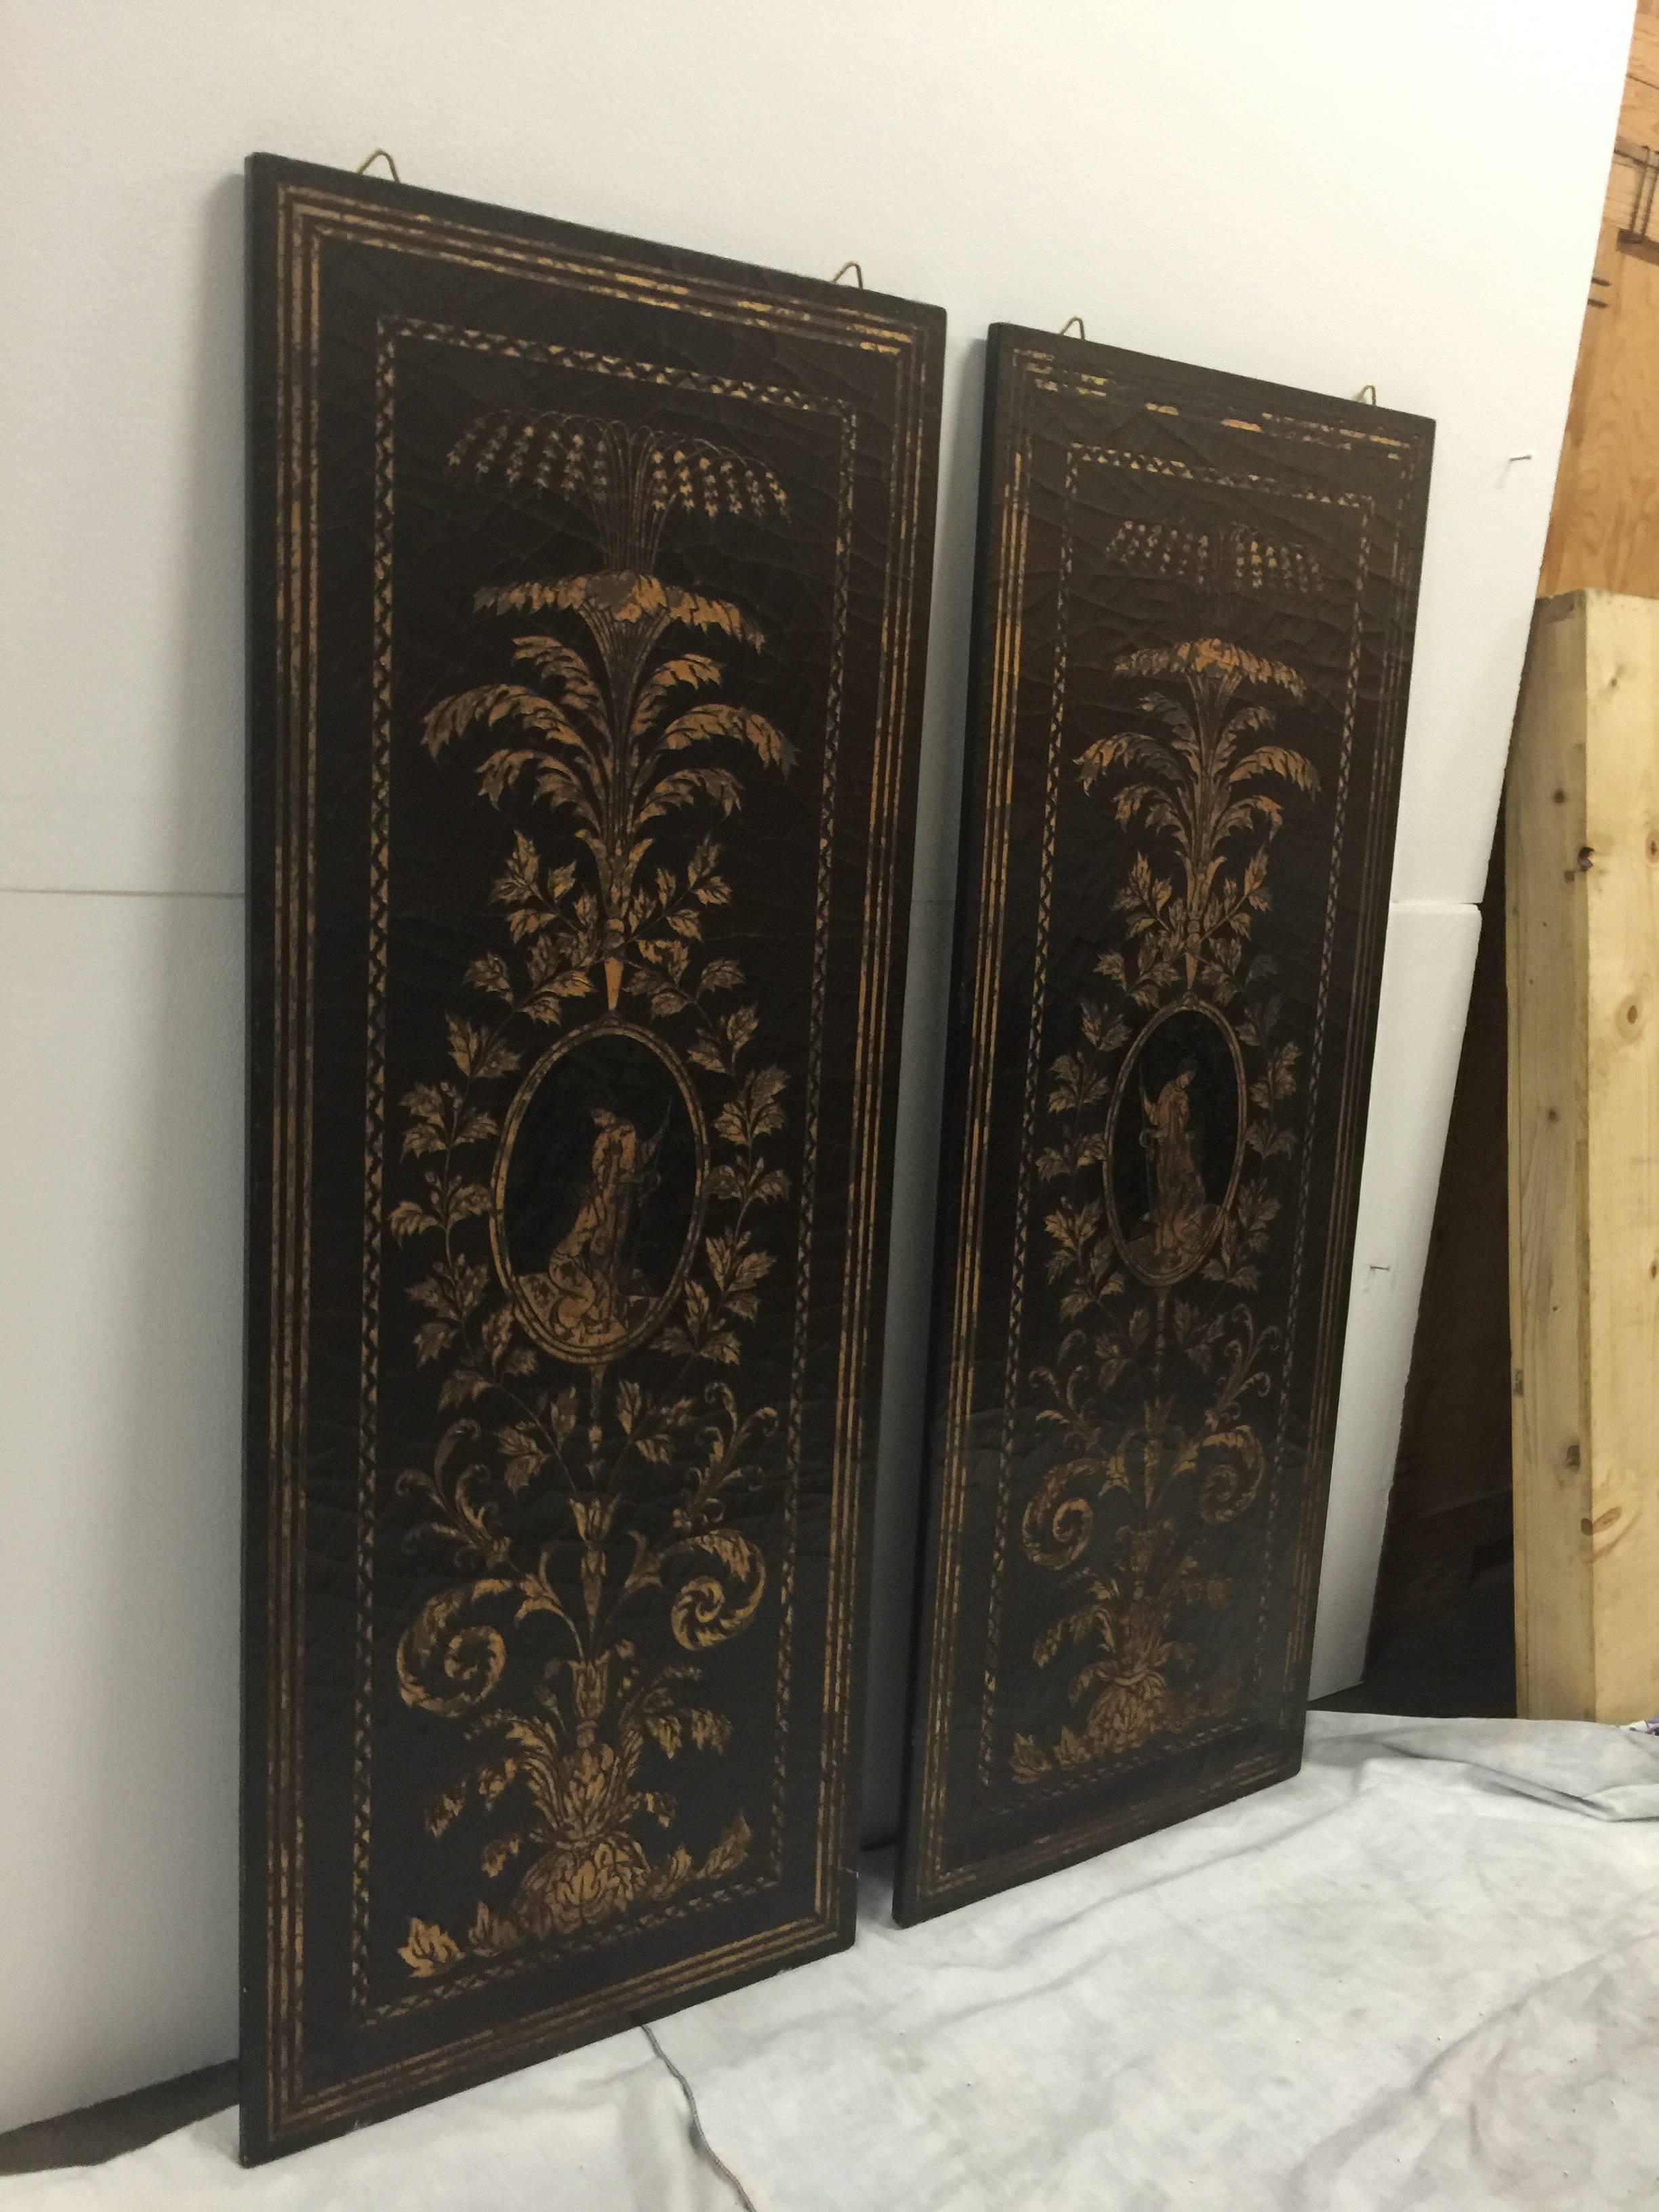 A pair of black lacquer and gilt wall screens. Italy, late 19th century, possibly earlier. Each screen features a flora motif and a center medallion with portrait of a period female. Designed to be used as wall decor but may be customized to be used